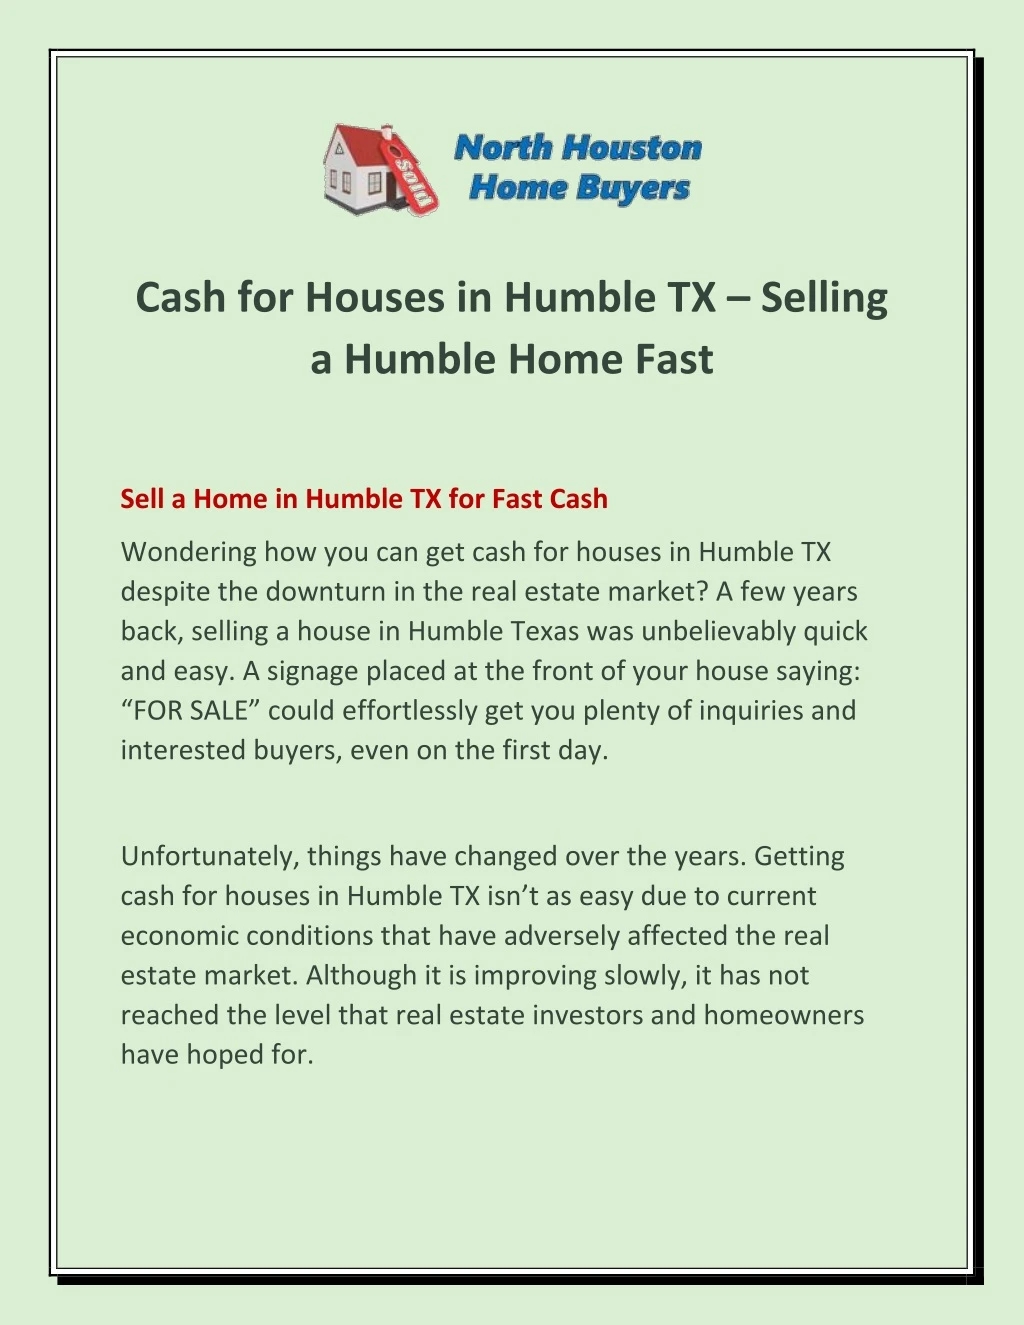 cash for houses in humble tx selling a humble